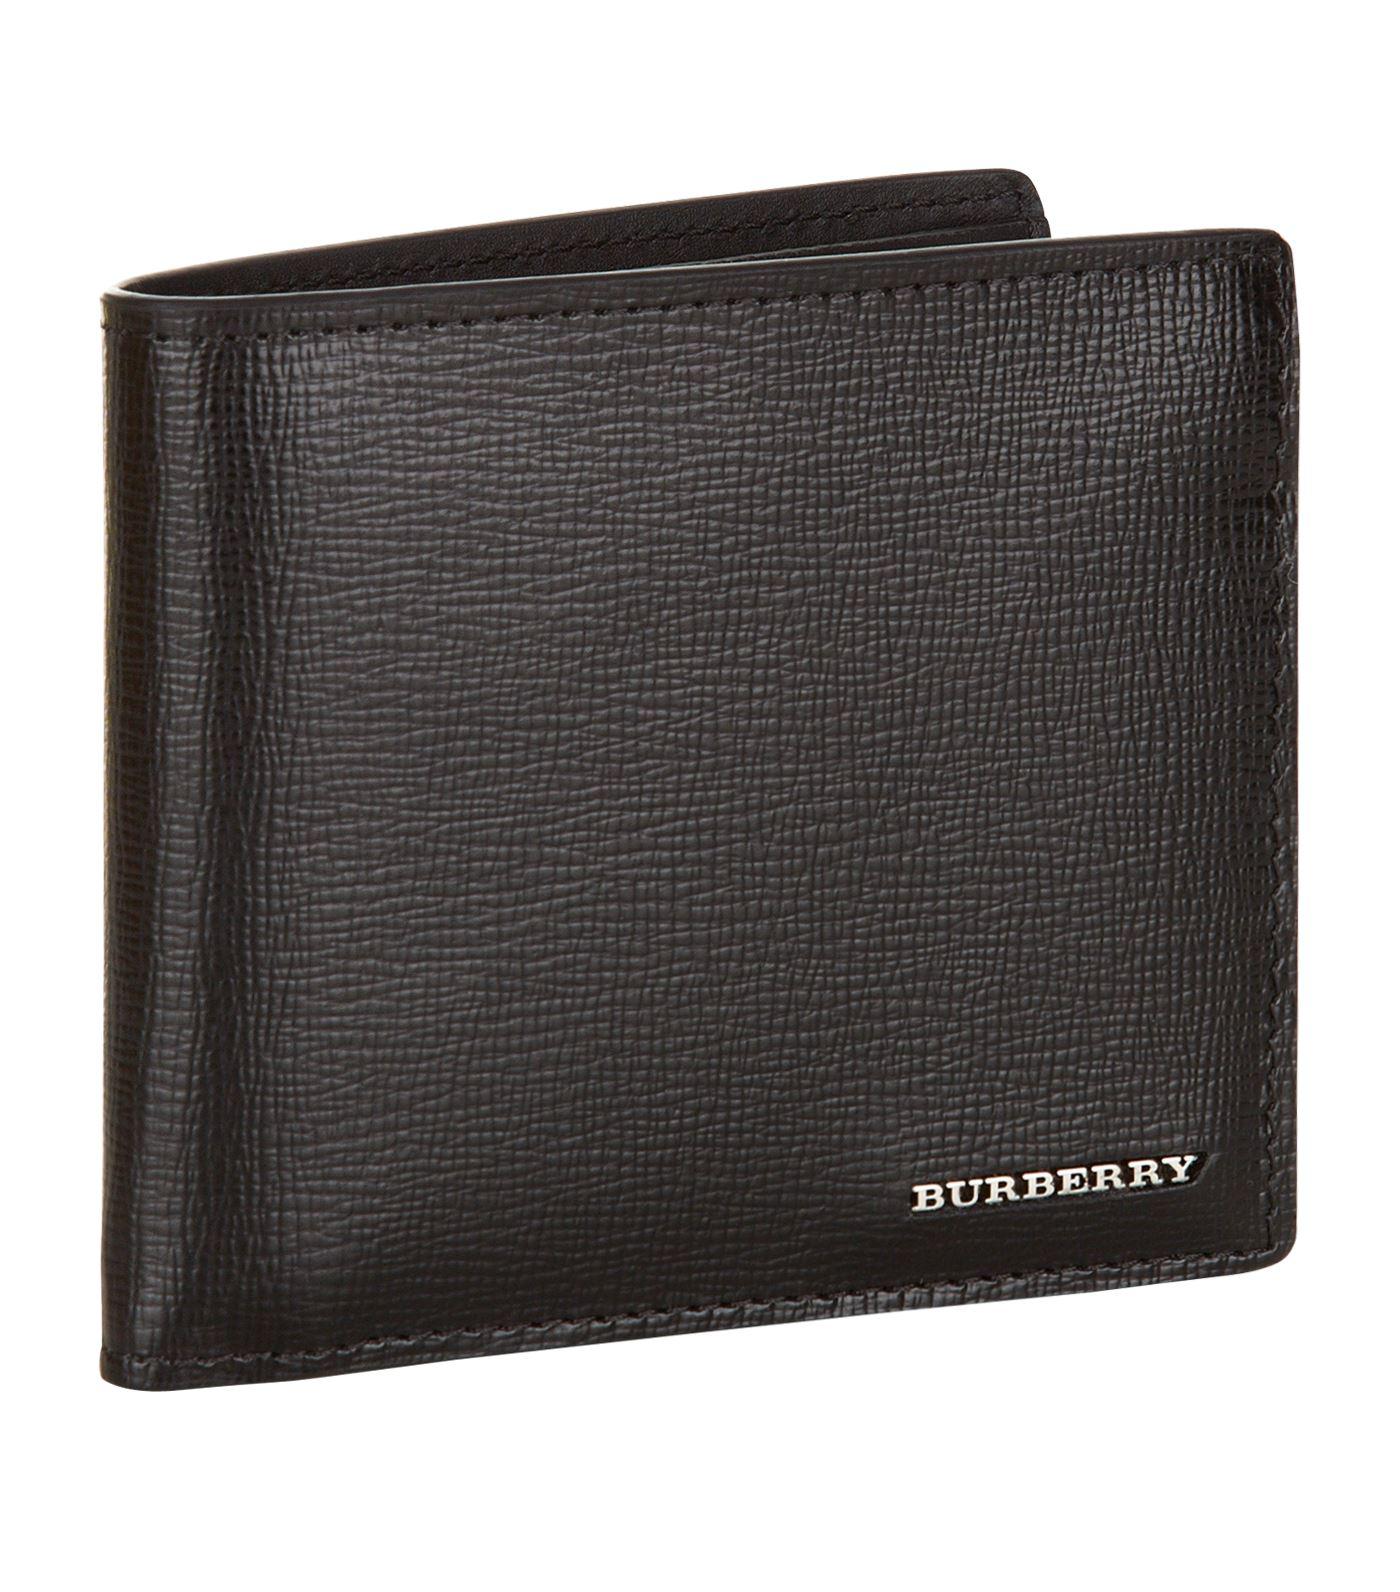 Lyst - Burberry Saffiano Leather Bifold Wallet in Black for Men